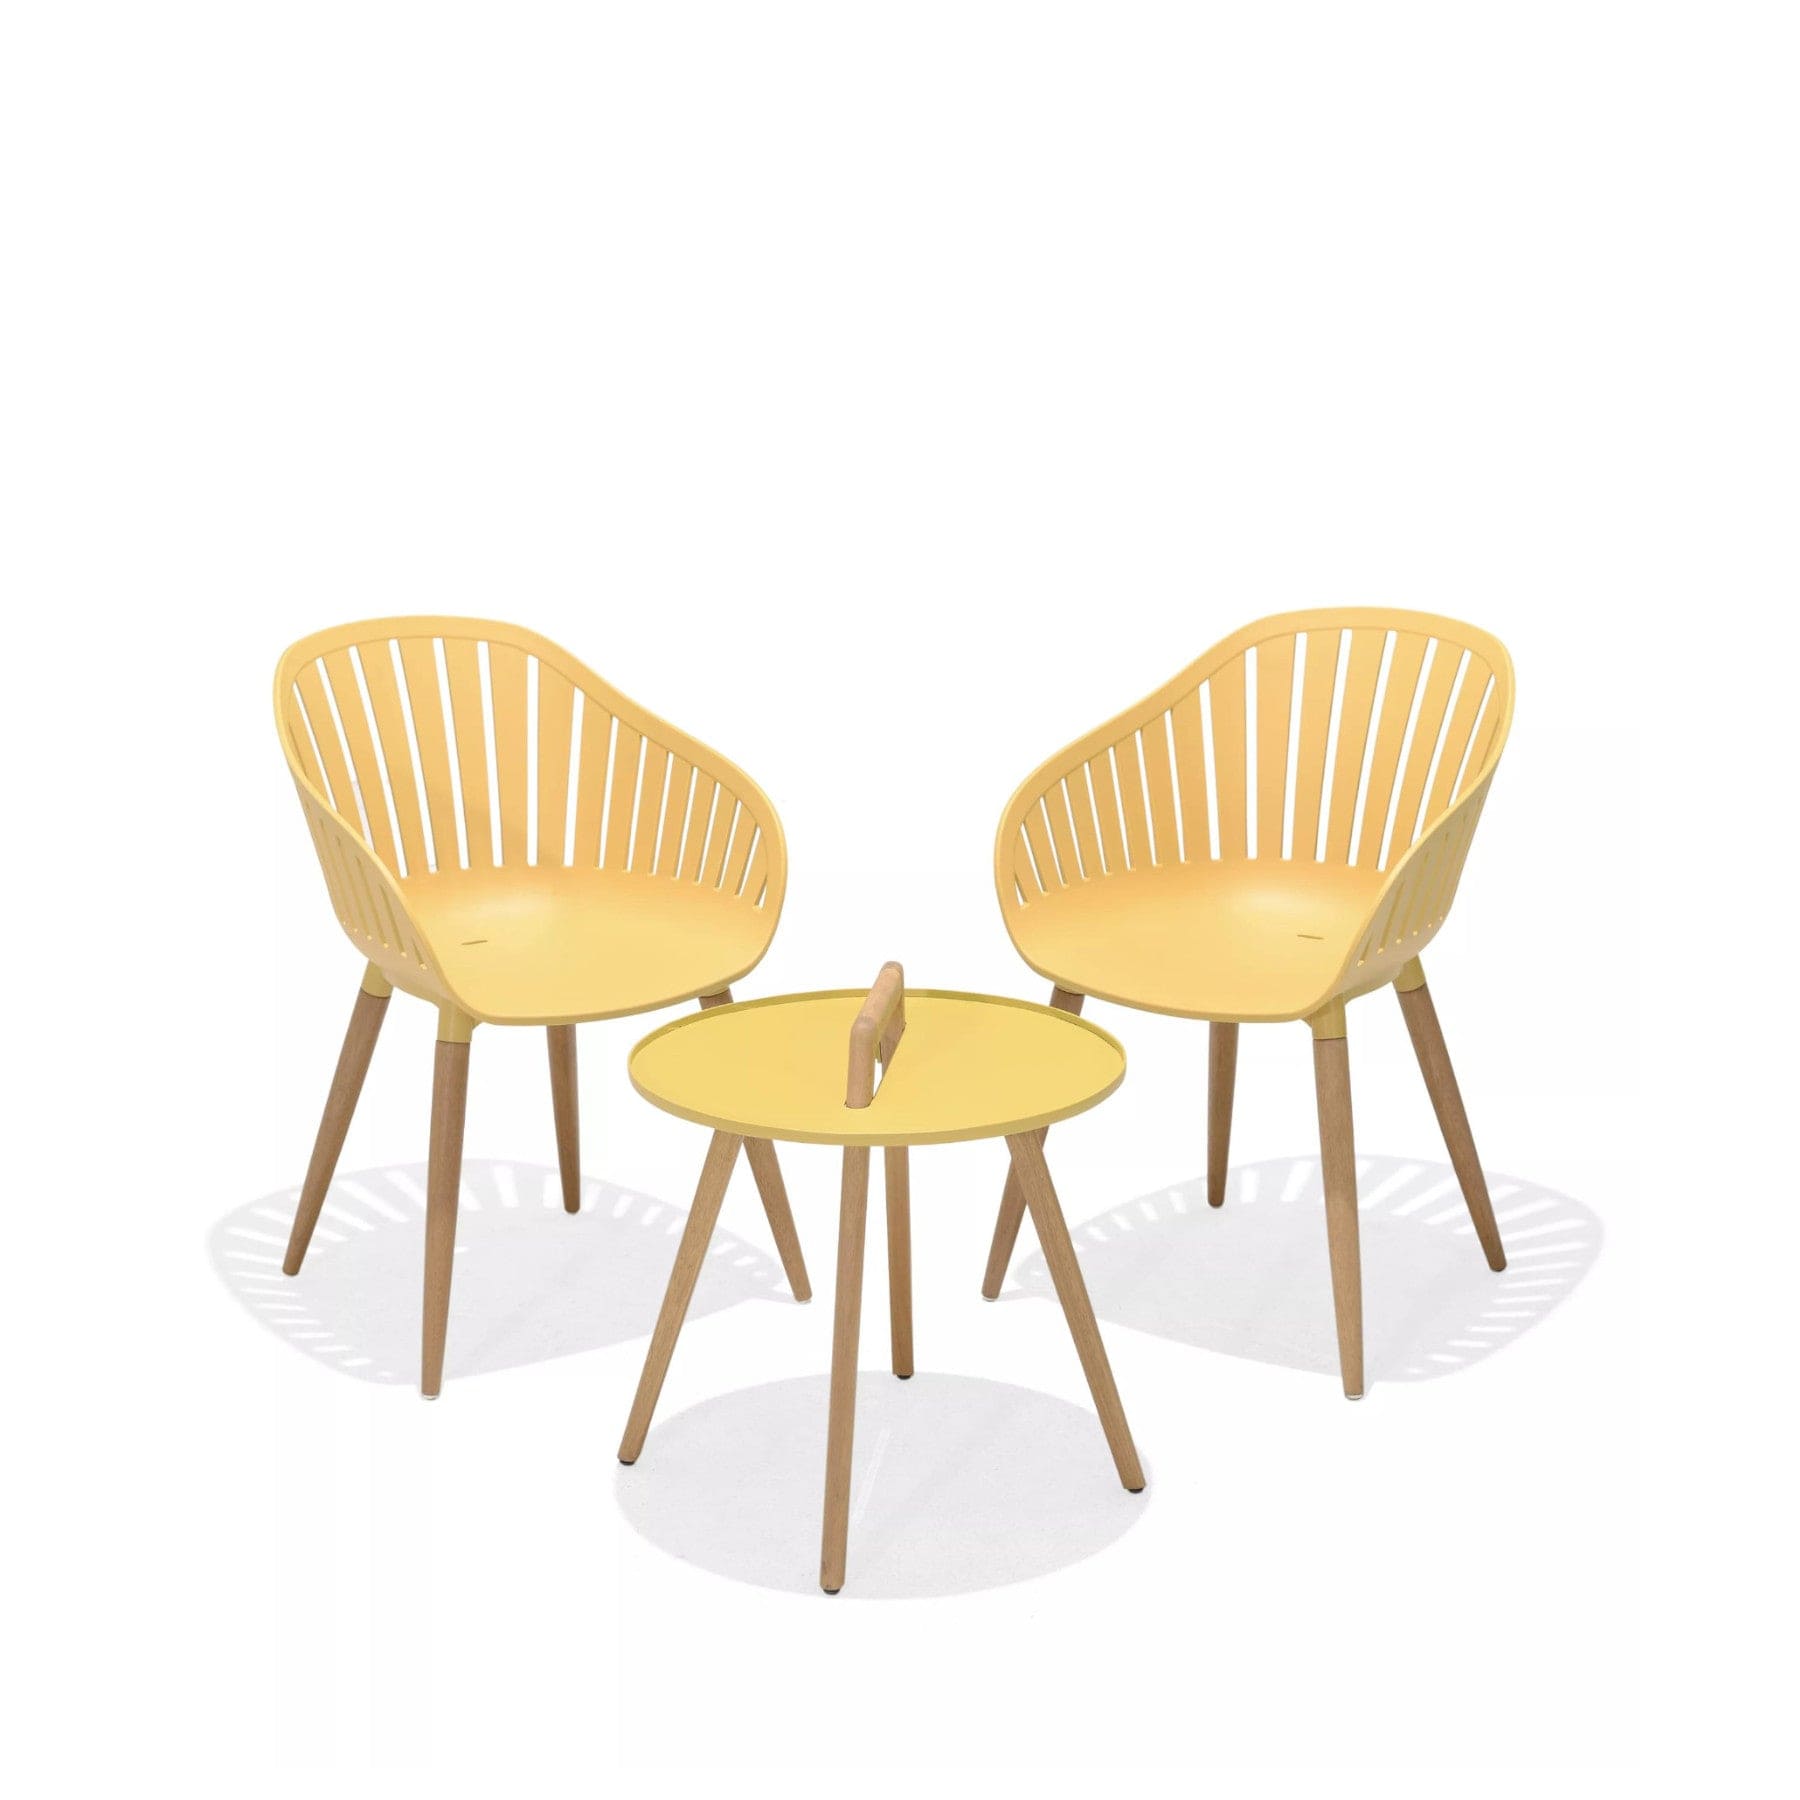 Modern yellow outdoor furniture set with two chairs and a round table on a white background